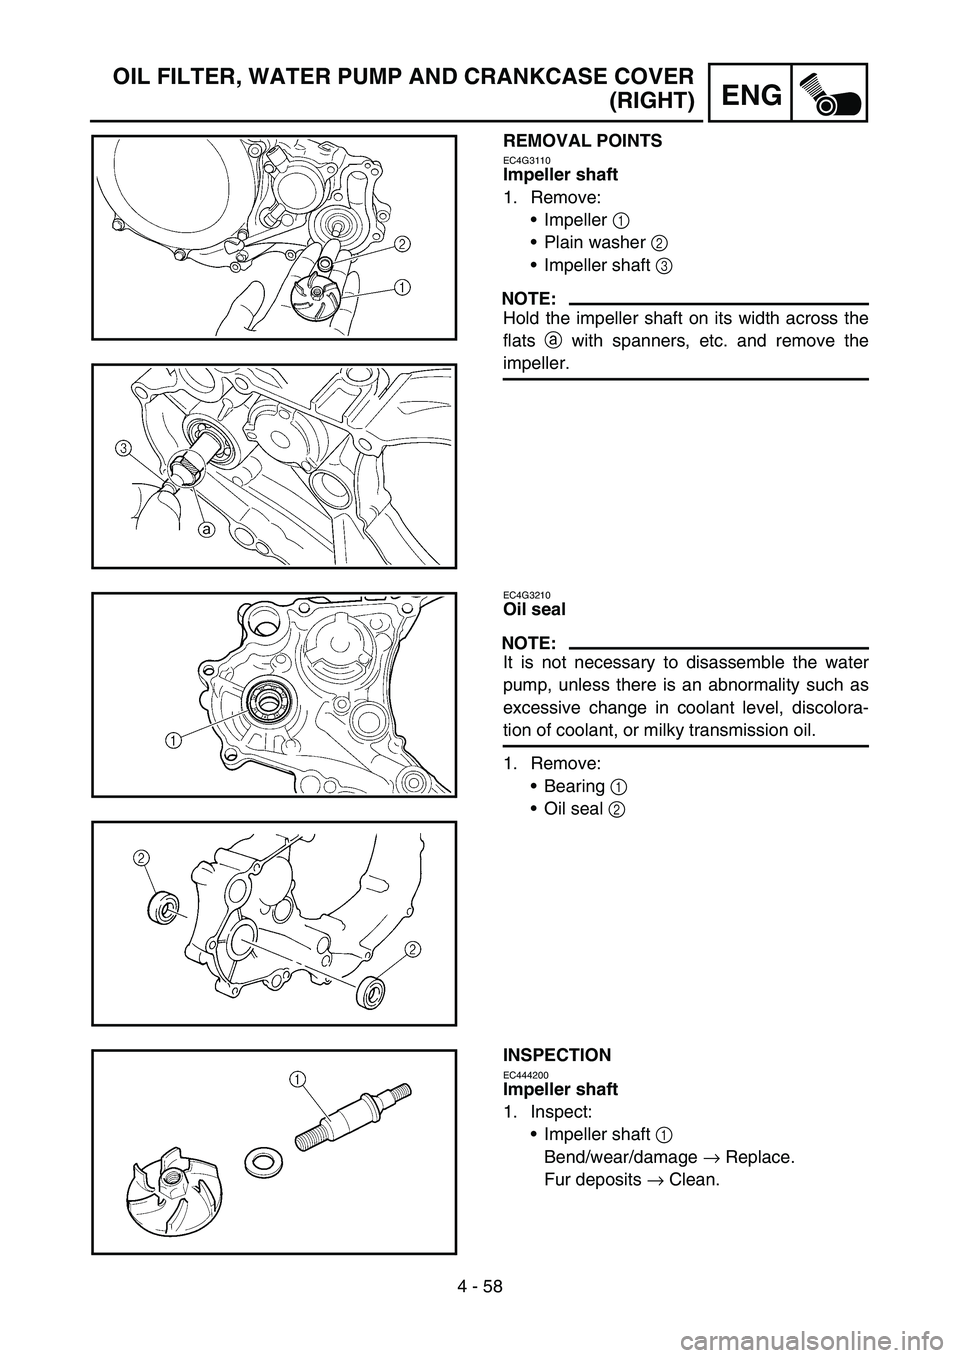 YAMAHA YZ450F 2007  Owners Manual 4 - 58
ENG
OIL FILTER, WATER PUMP AND CRANKCASE COVER
(RIGHT)
REMOVAL POINTS
EC4G3110
Impeller shaft
1. Remove:
Impeller 1 
Plain washer 2 
Impeller shaft 3 
NOTE:
Hold the impeller shaft on its wi